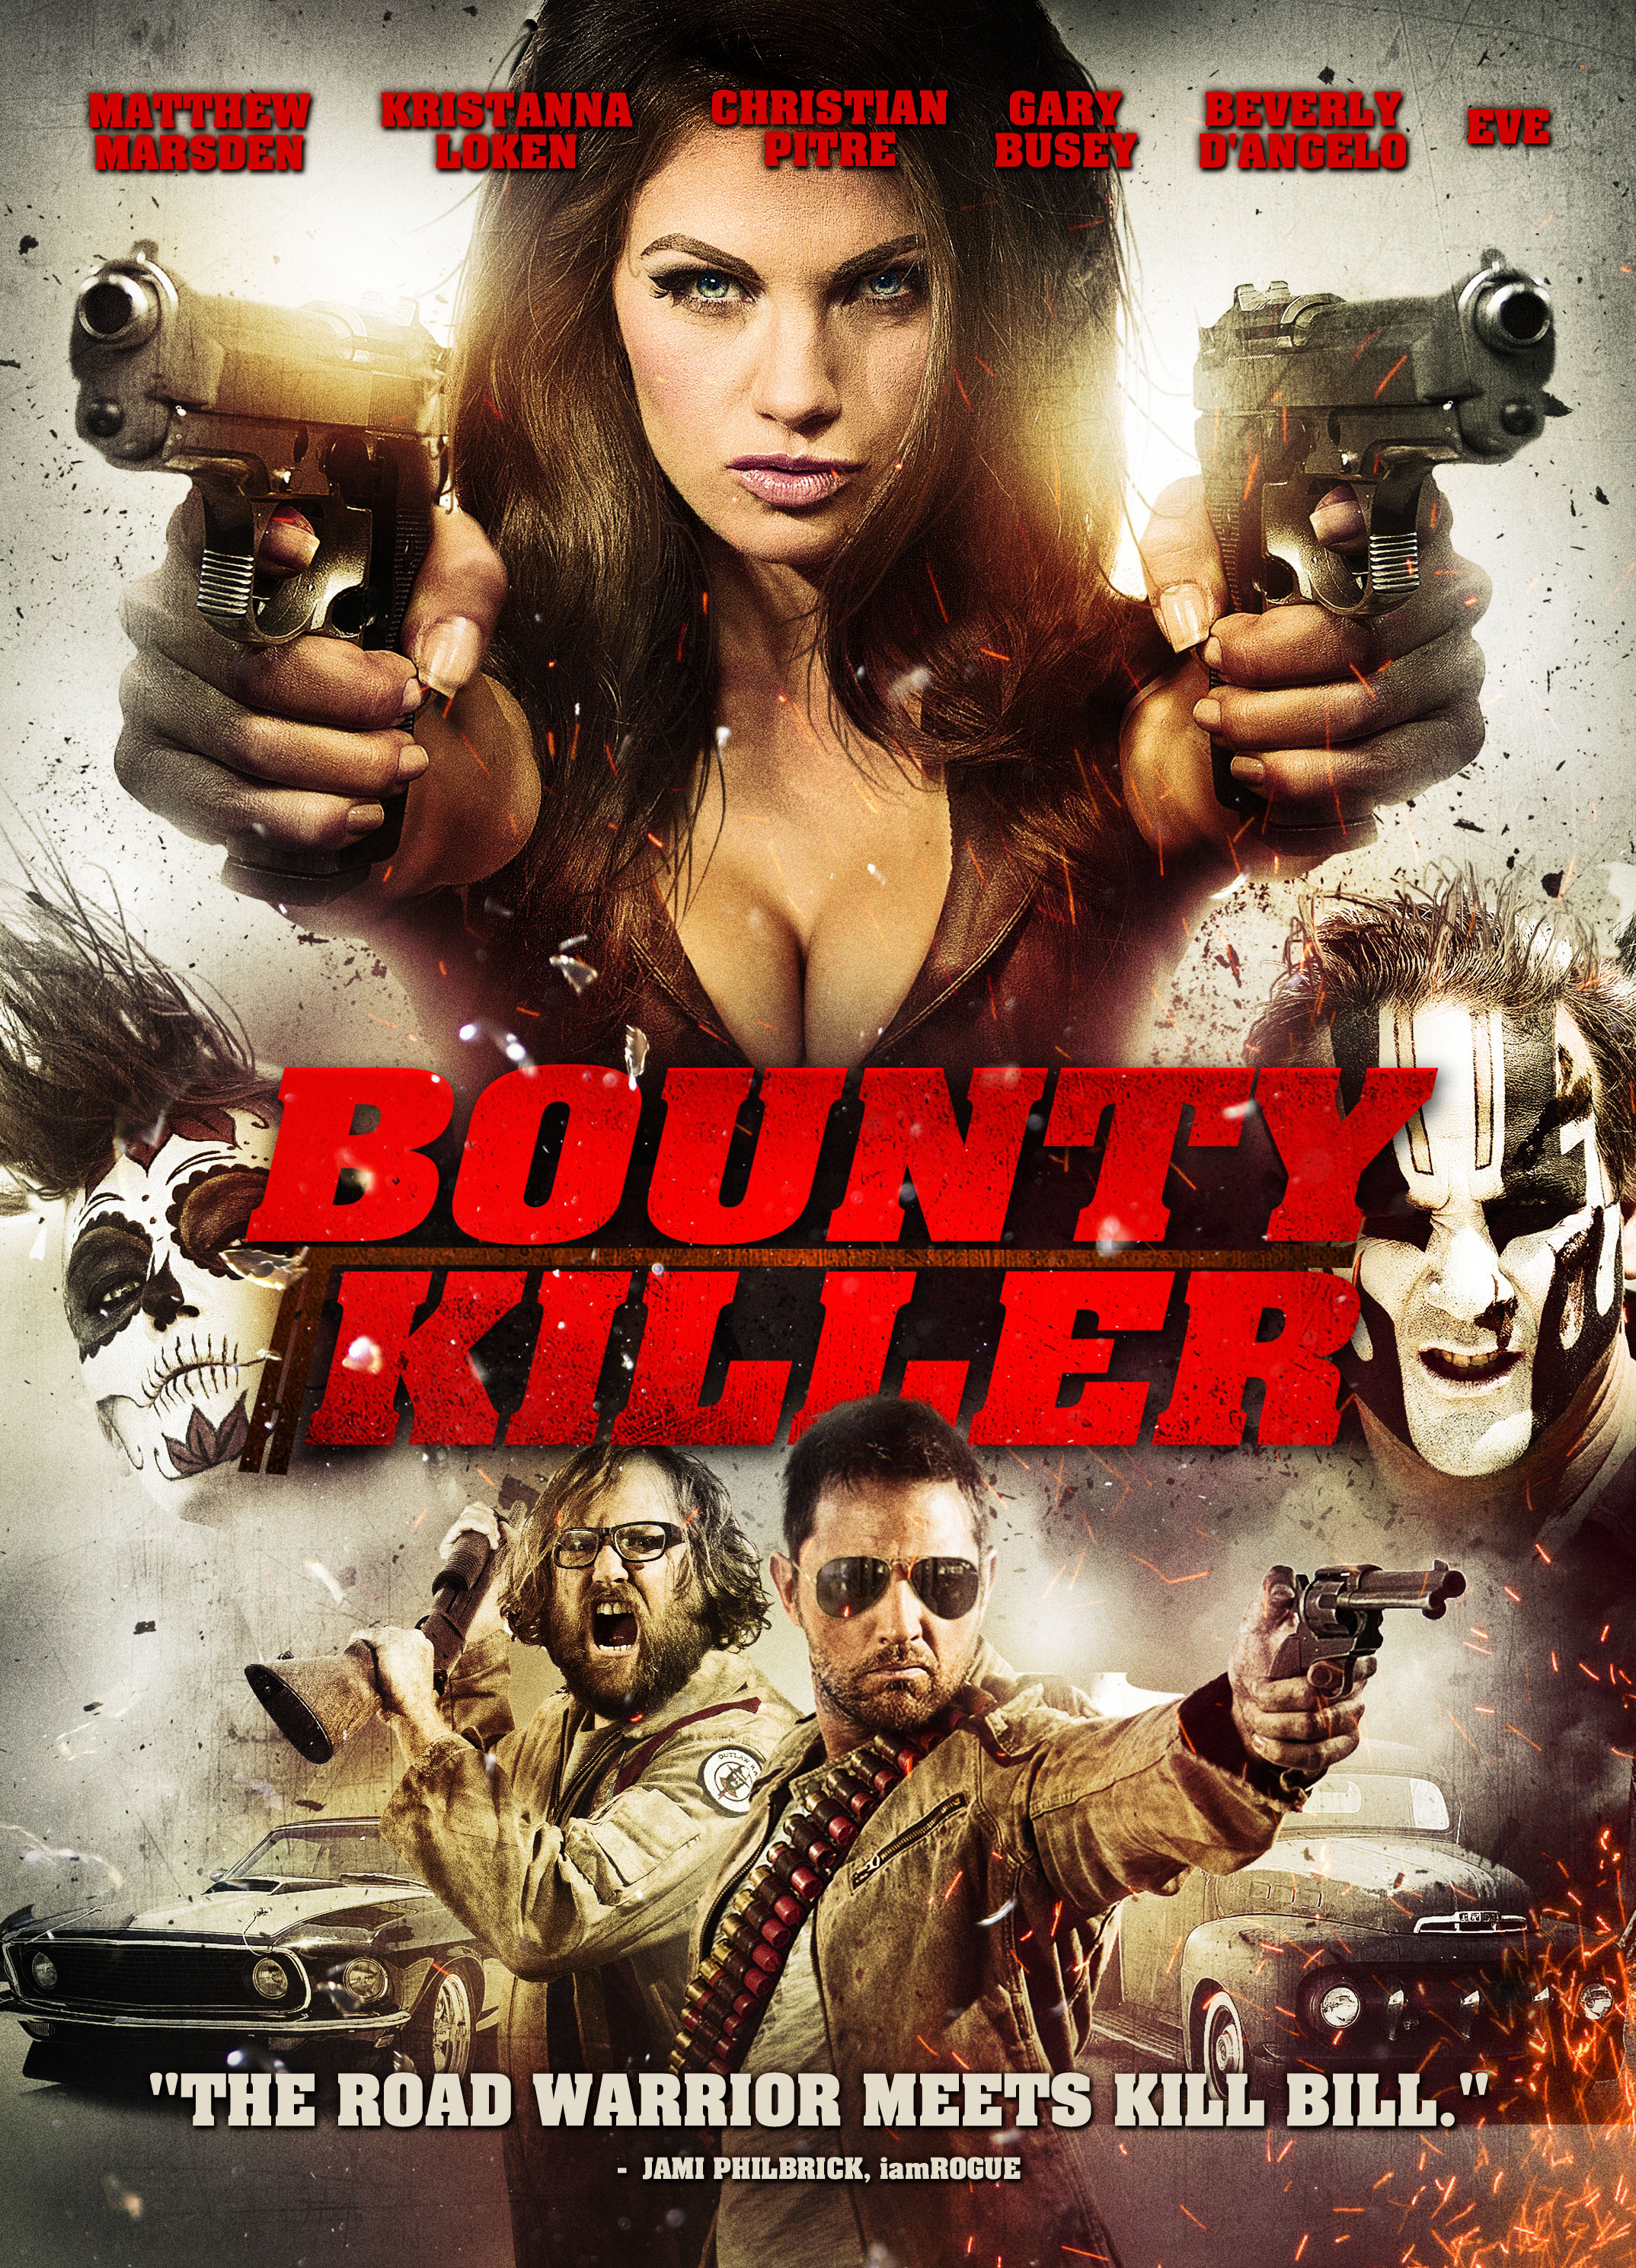 No Room For Corporate Greed In Latest Bounty Killer Release Hnn